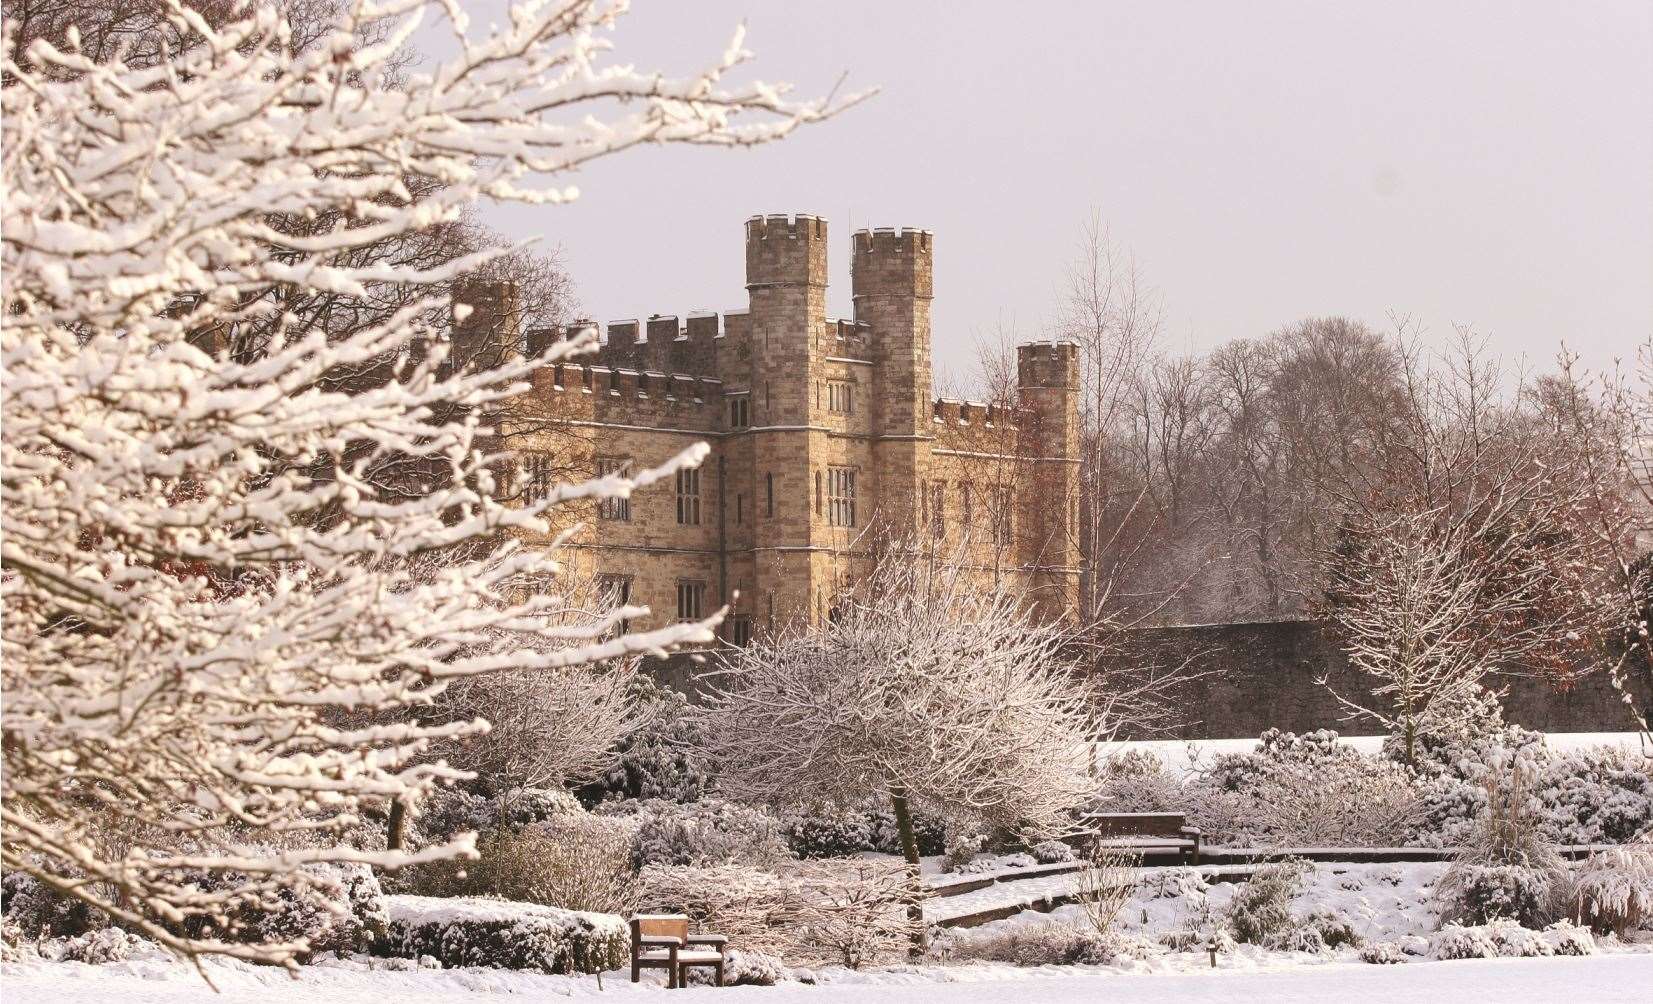 The castle will be turned into a snow-covered winter wonderland for the new festive event. Picture: Leeds Castle